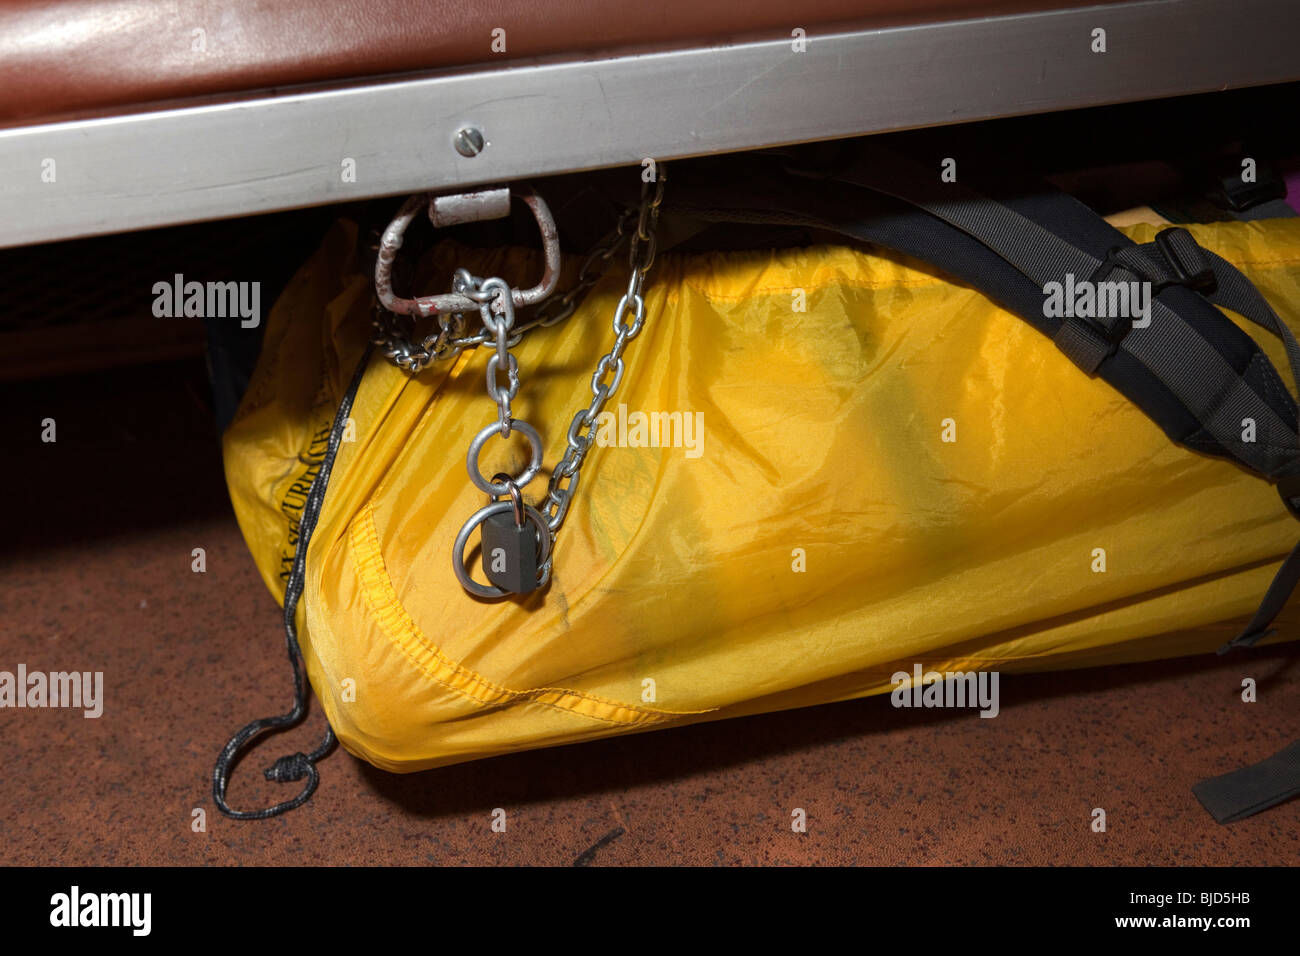 India, Kerala, Kochi, rail travel security, western travellers bag secured with chain and lock under railway seat Stock Photo